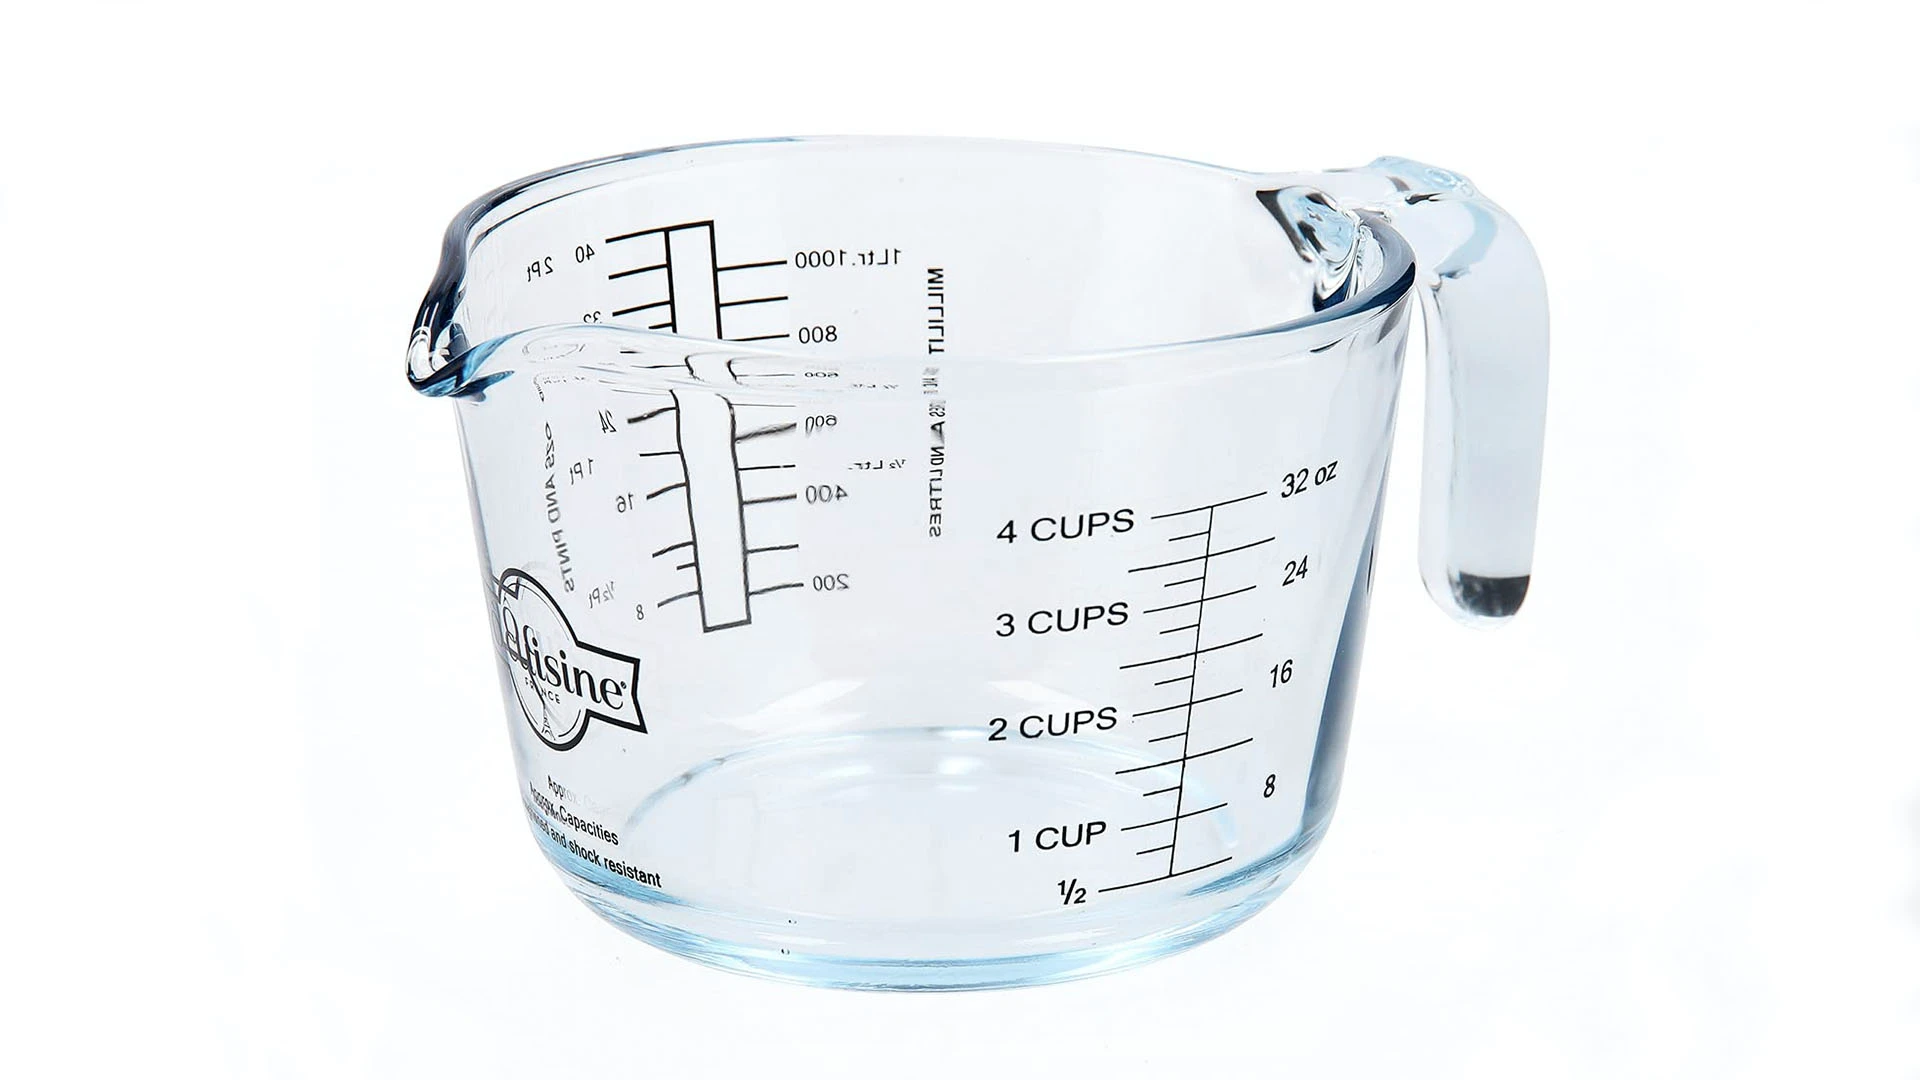 Use a liquid measuring cup for wet ingredients 3 cups = 24 oz